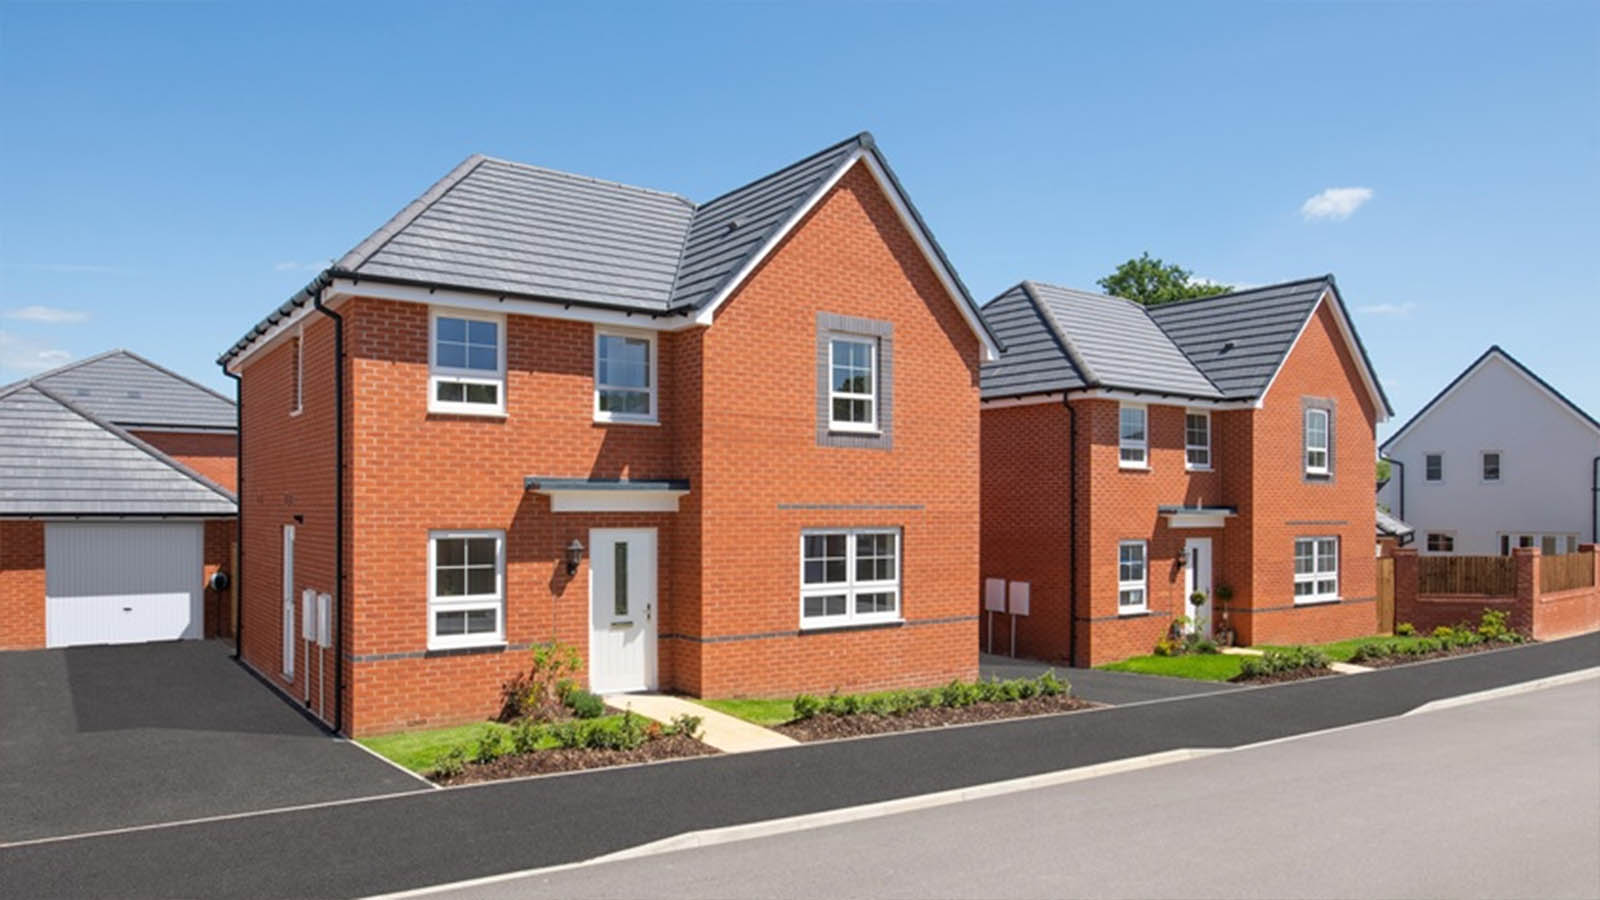 The ‘Radleigh’ house type from Barratt Homes